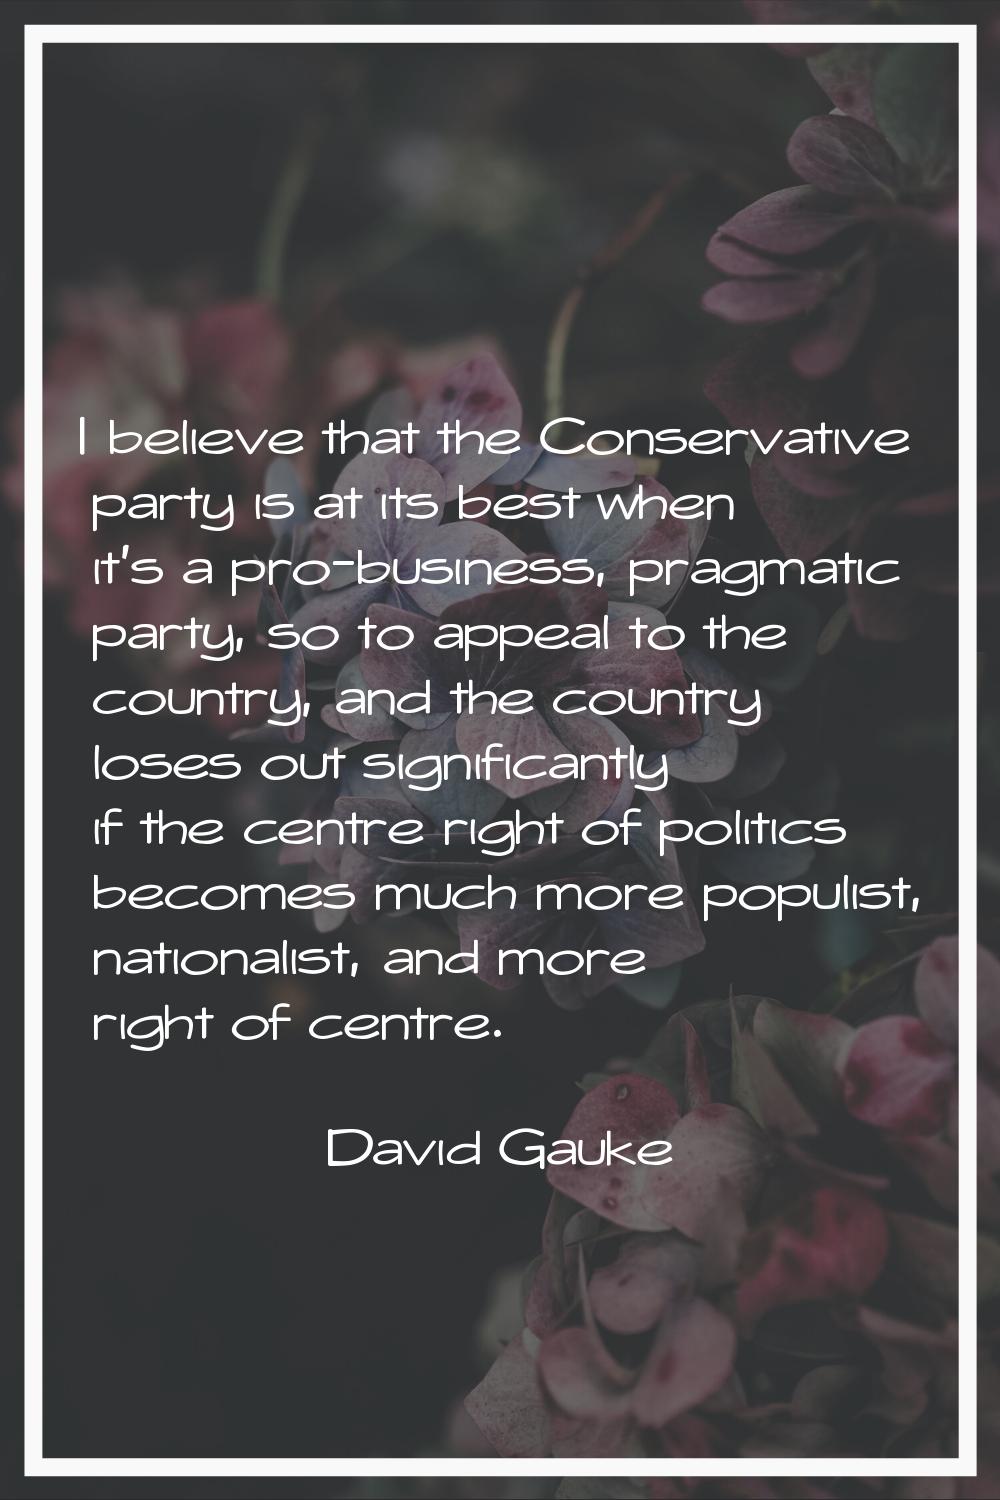 I believe that the Conservative party is at its best when it’s a pro-business, pragmatic party, so 